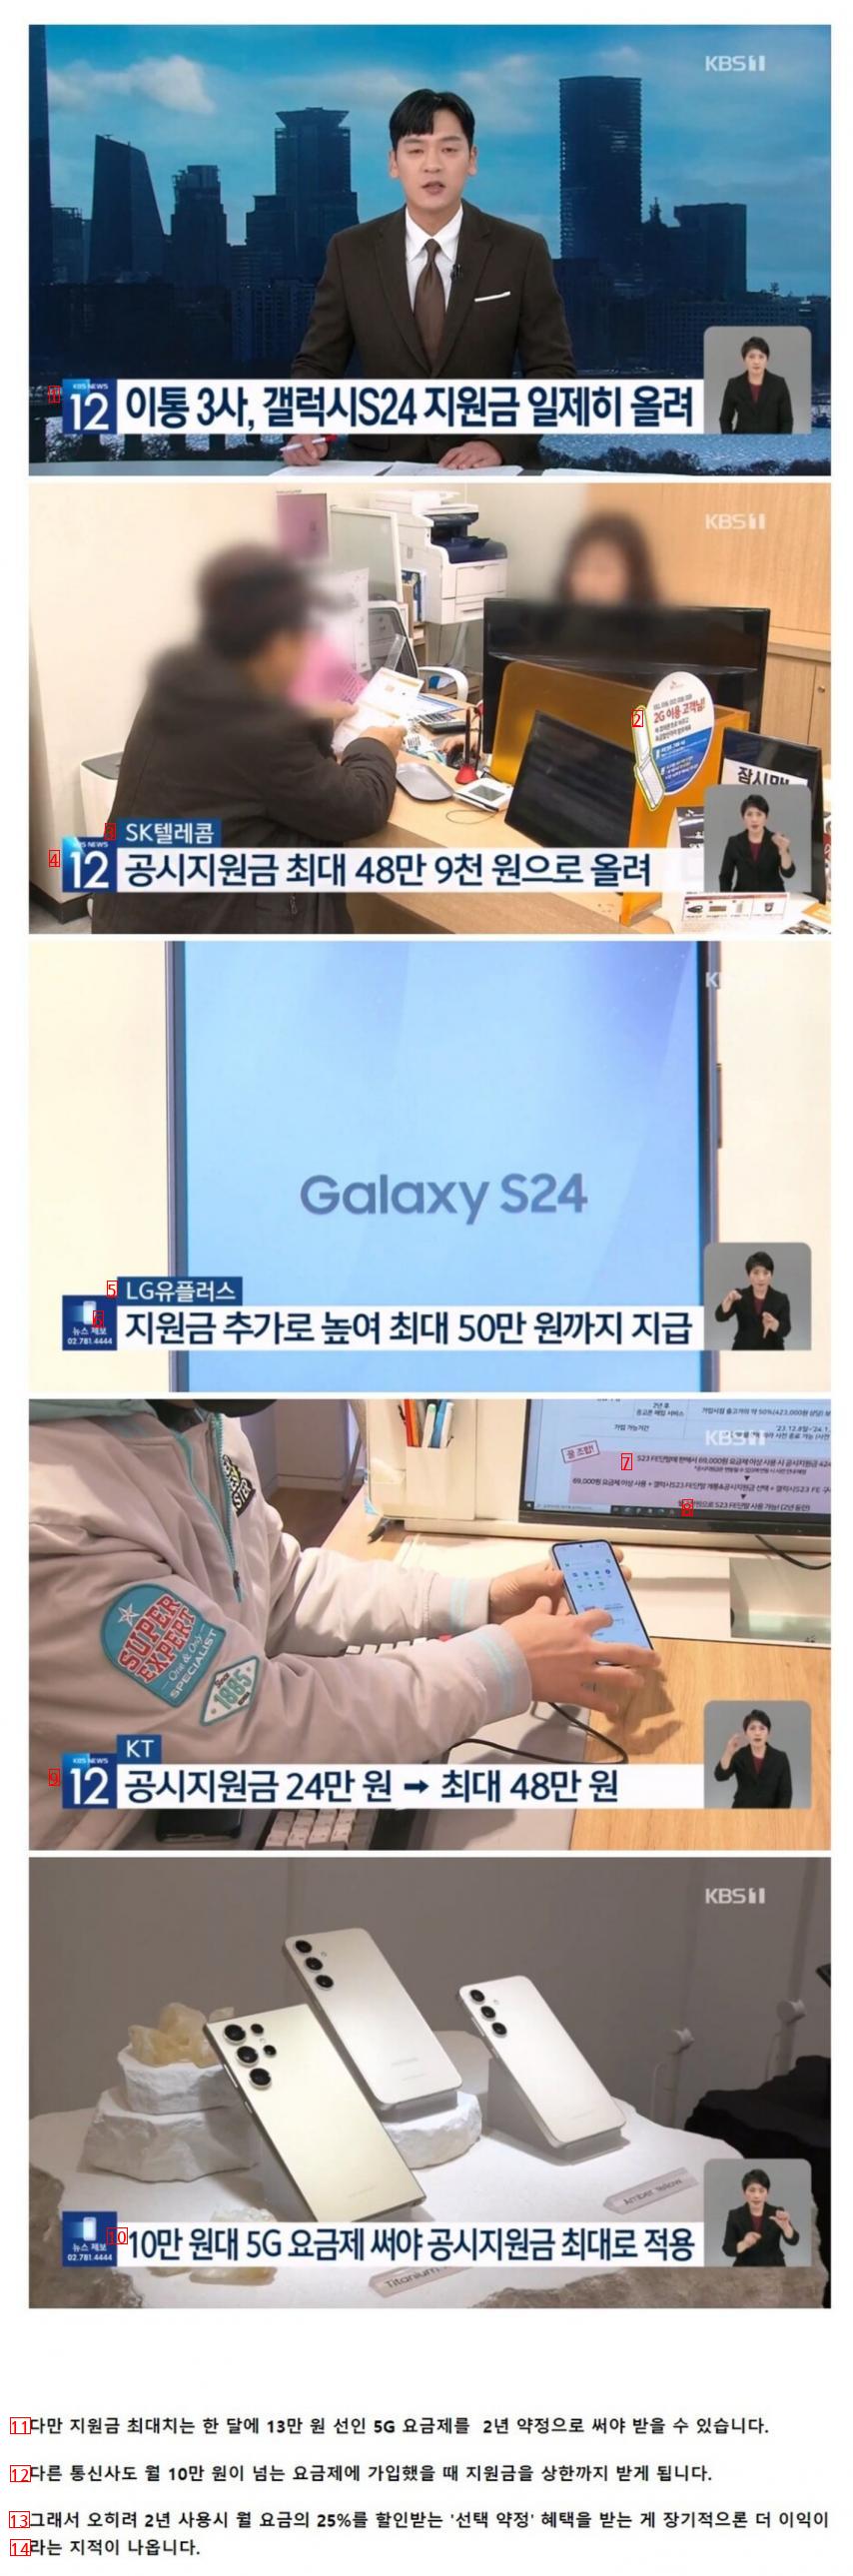 Up to 500,000 won in support for Galaxy S24